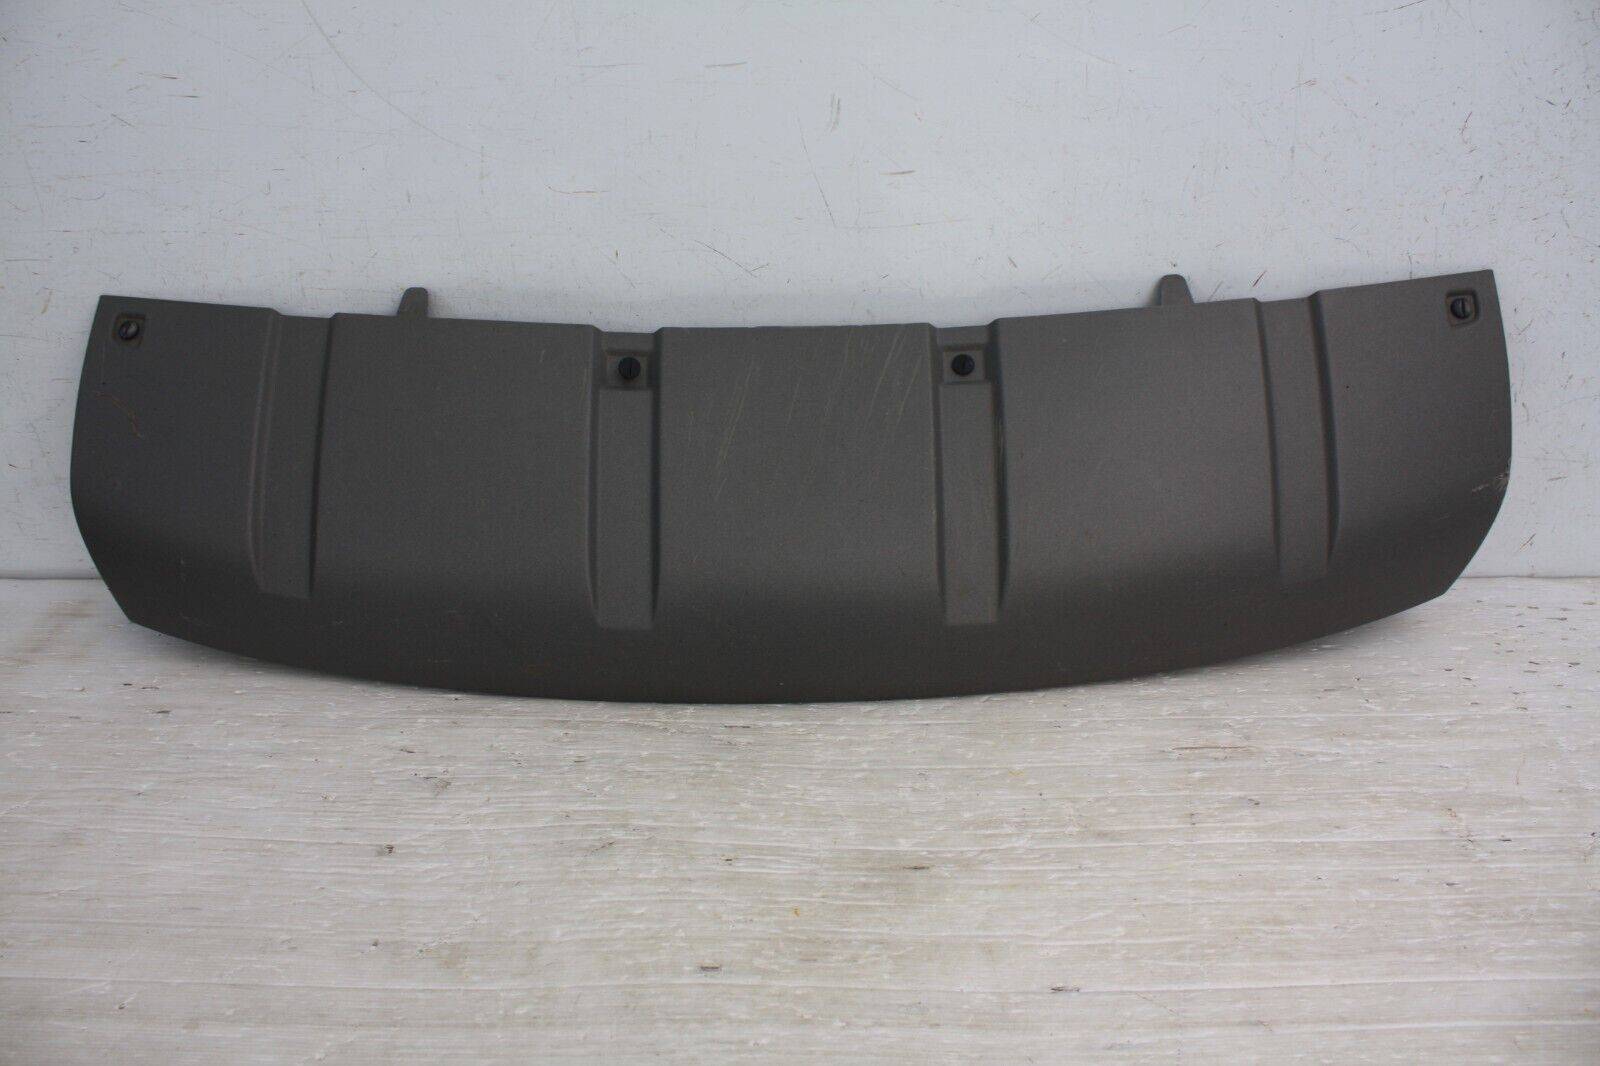 Land Rover Discovery Front Bumper Lower Section 2017 ON HY32 17F011 AA SEE PICS 175918386003